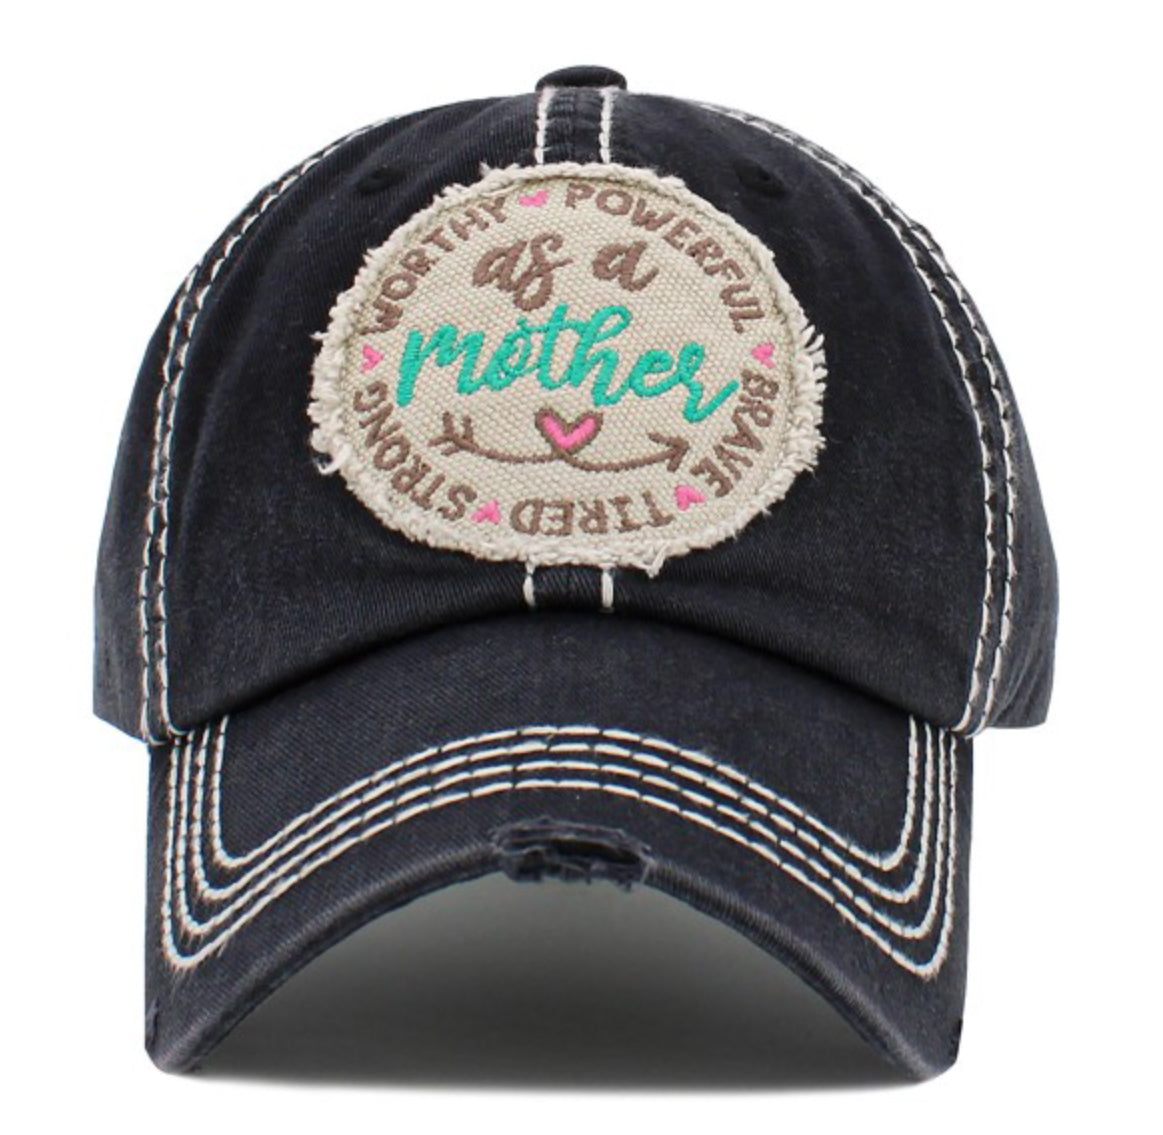 As a Mother Hat